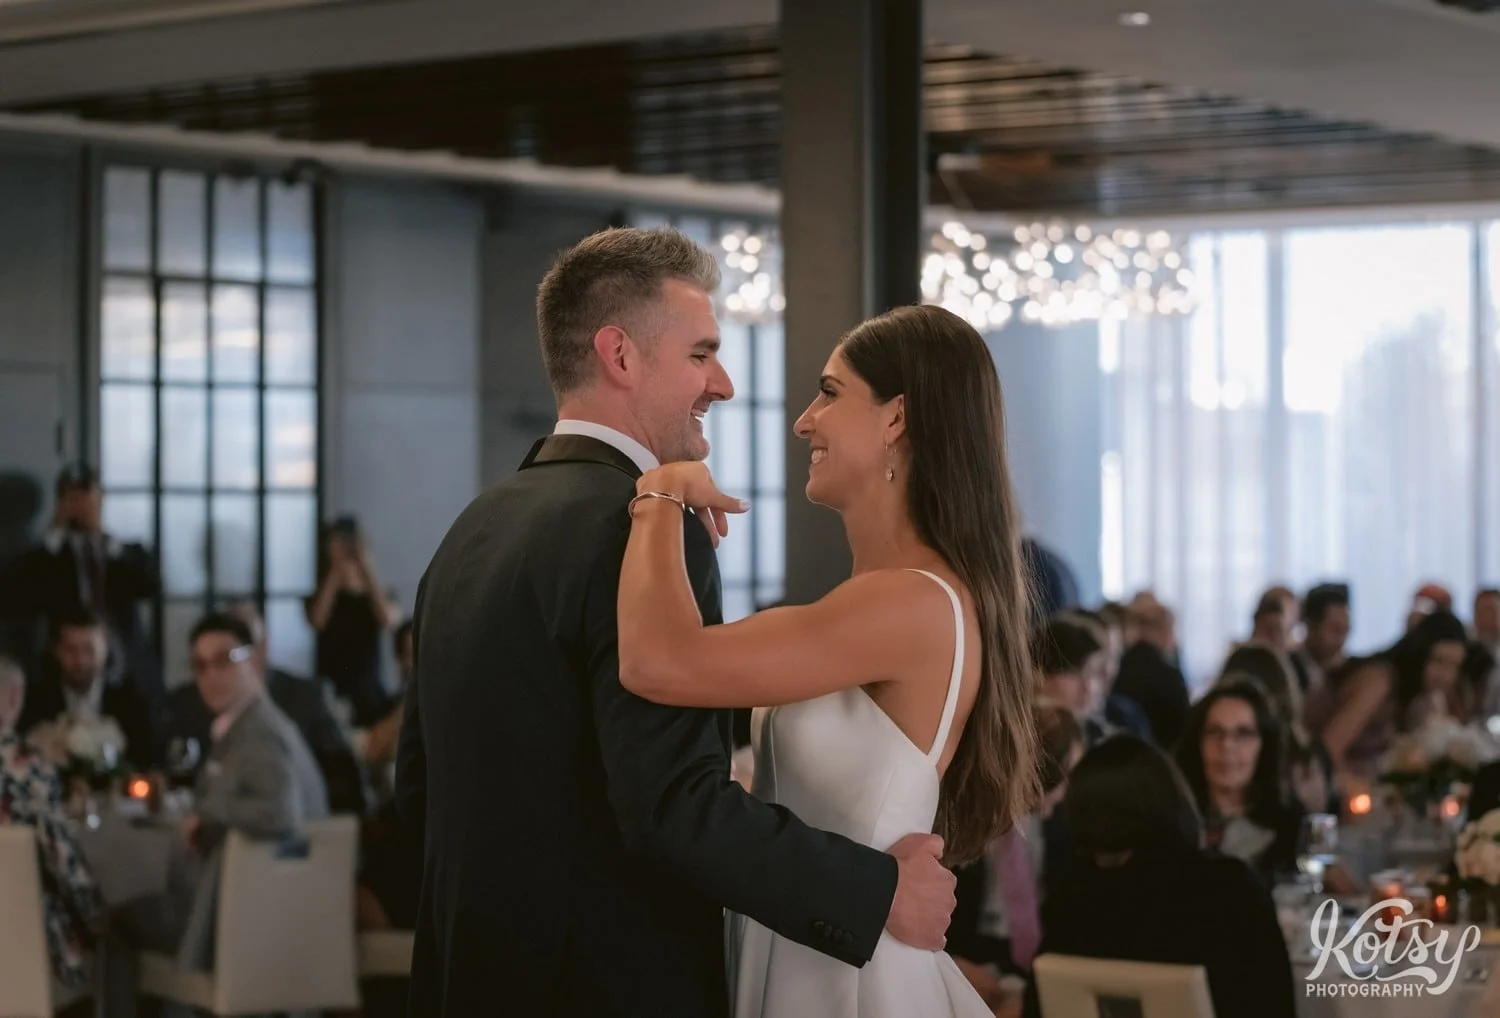 A bride and groom smile at each other while they enjoy a first dance during their Village Loft wedding reception in Toronto, Canada